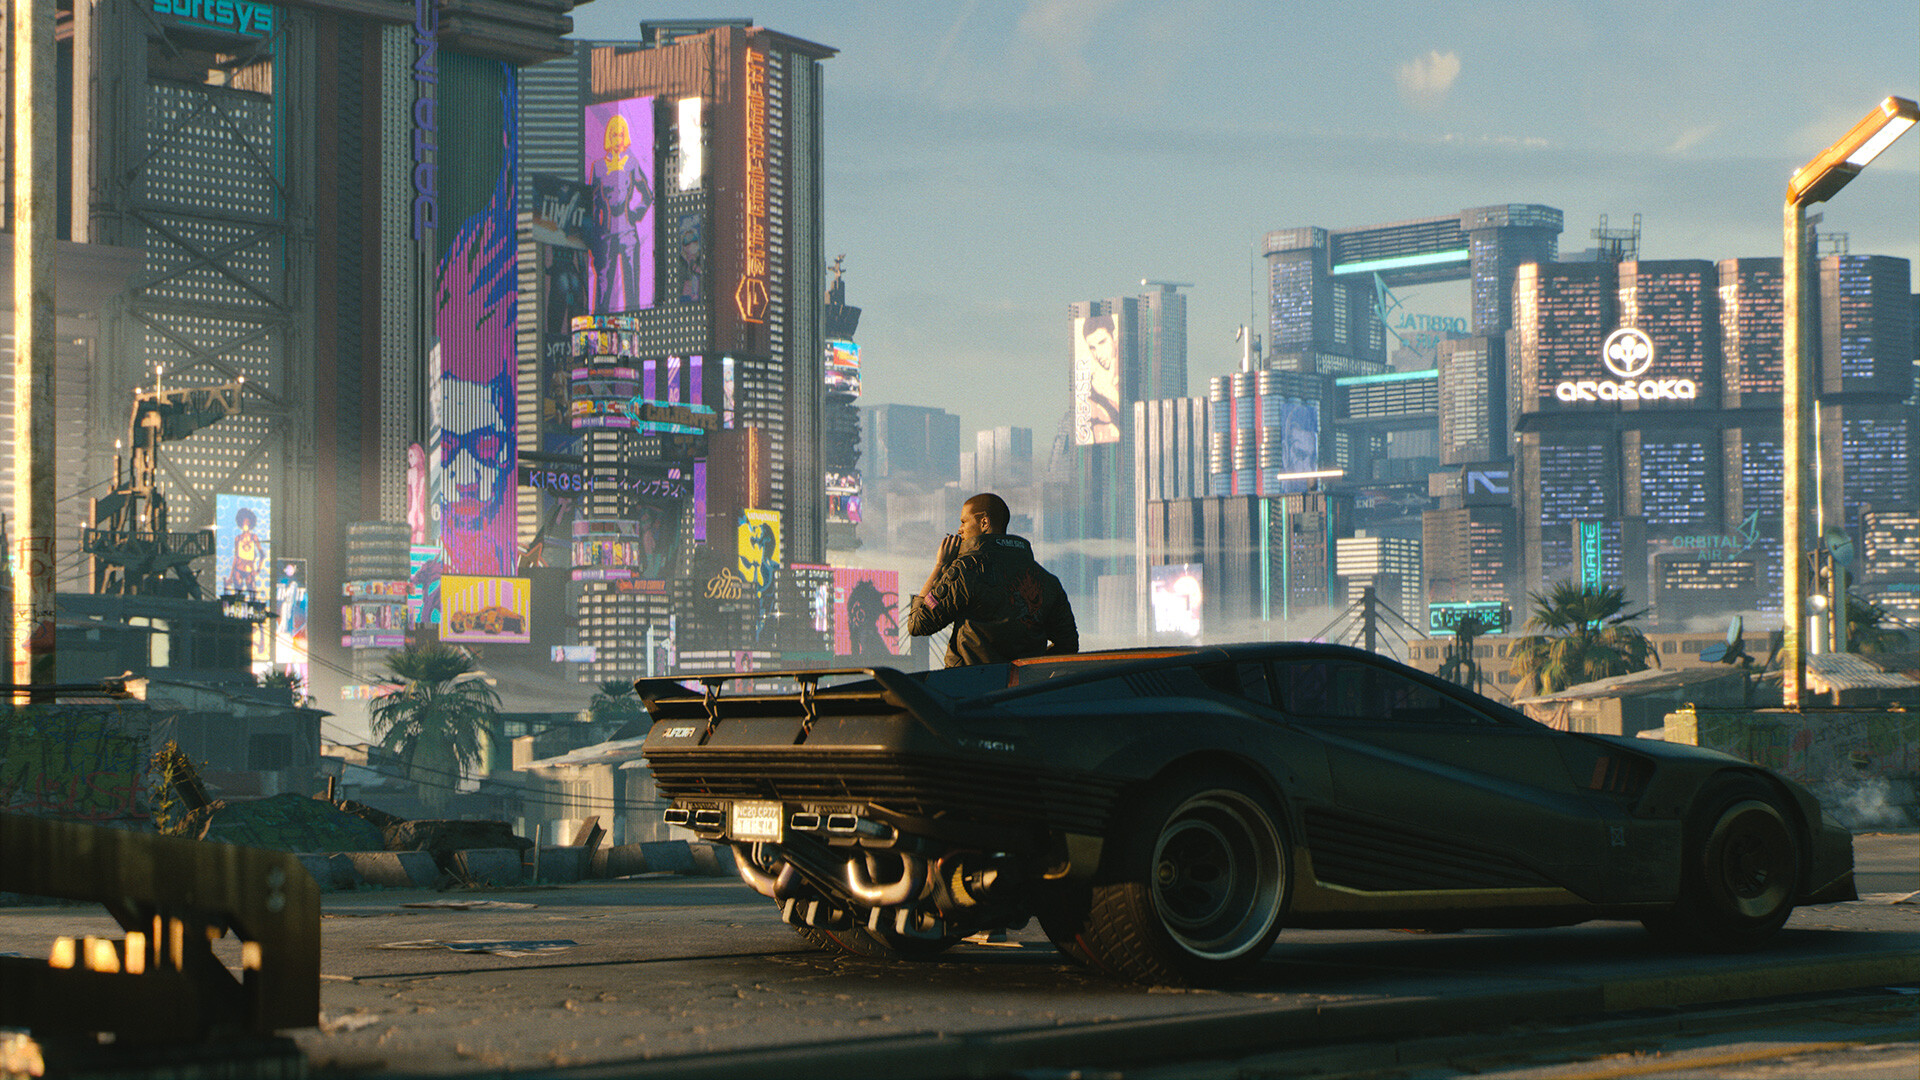 Download Cyberpunk 2077 For PC for free, the game size is – 42GB